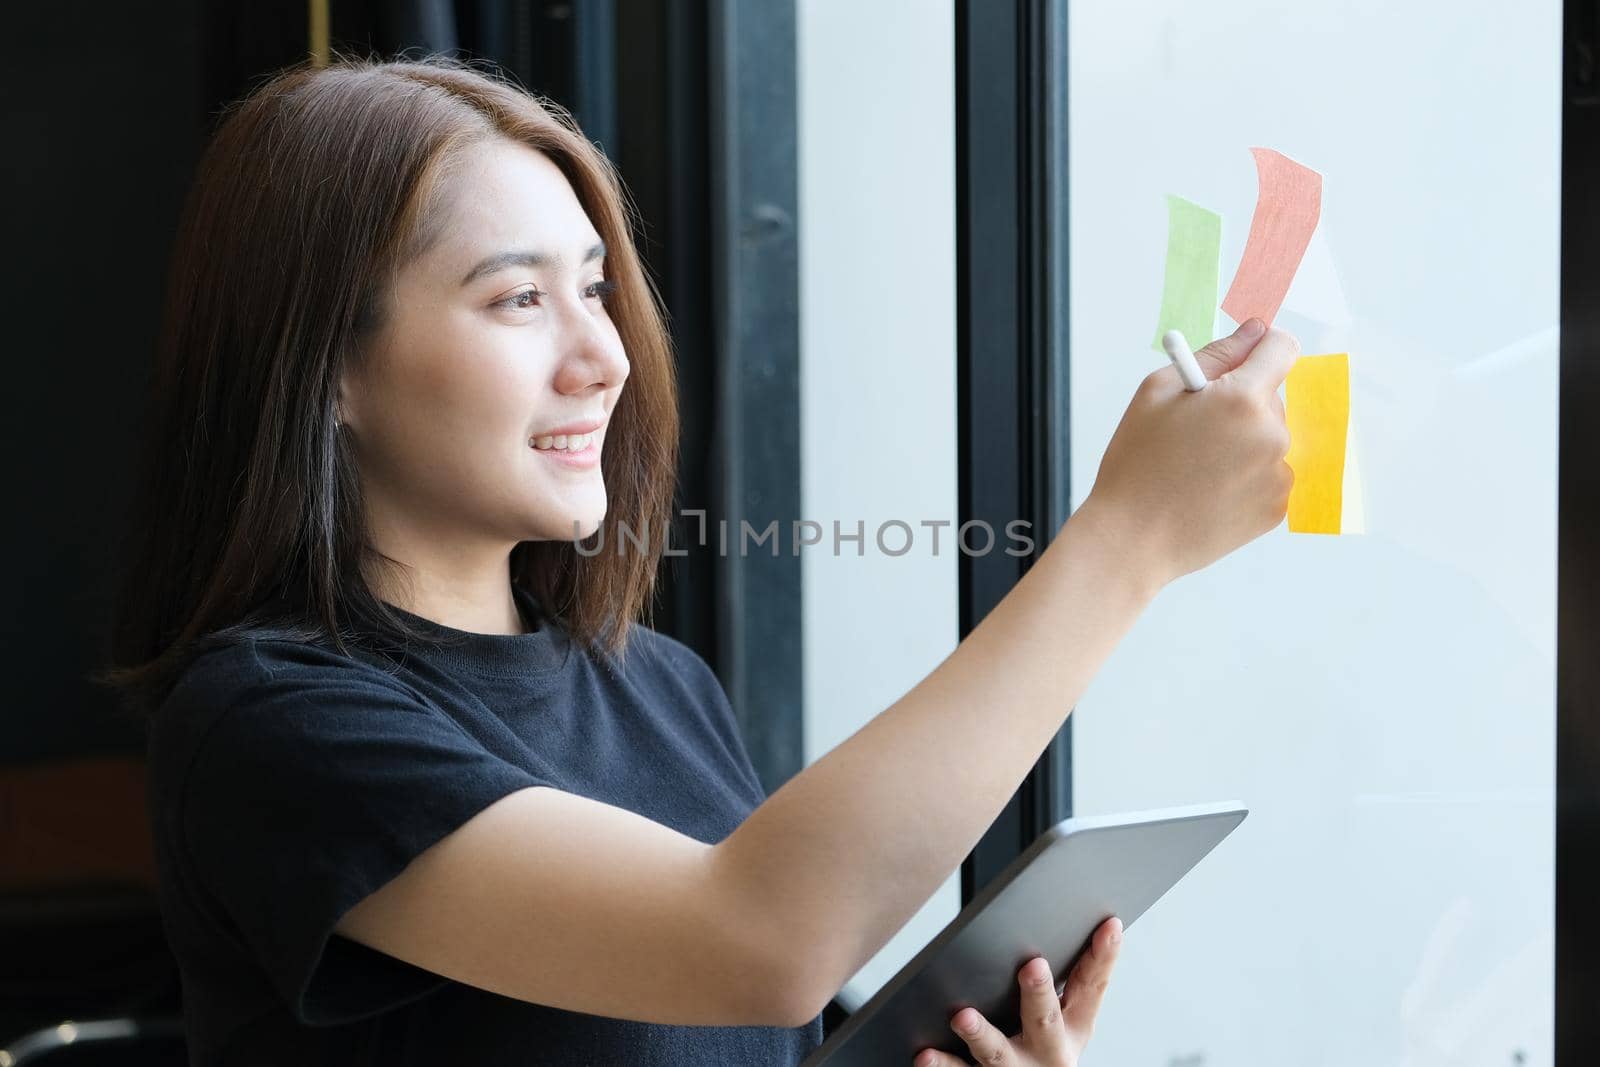 A female company employee using notepad and tablet to analyze company budgets